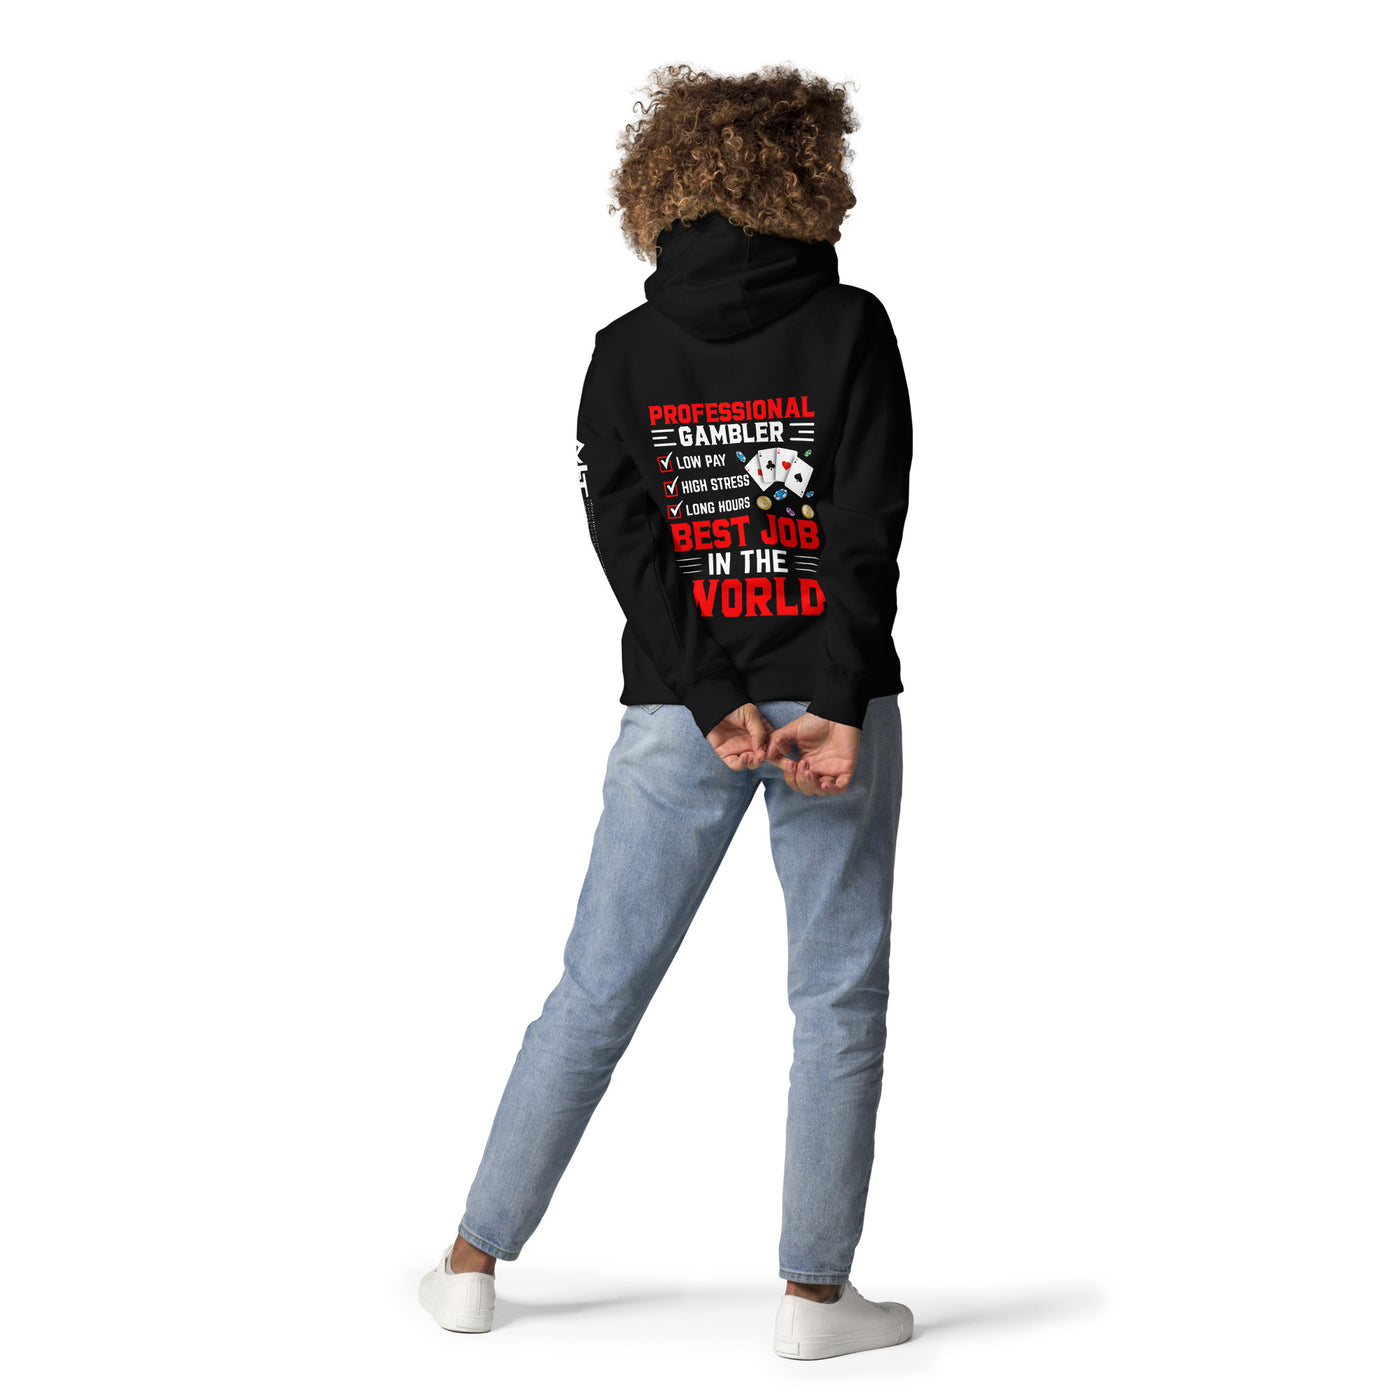 Professional Gambler: The Best Job in the World - Unisex Hoodie ( Back Print )